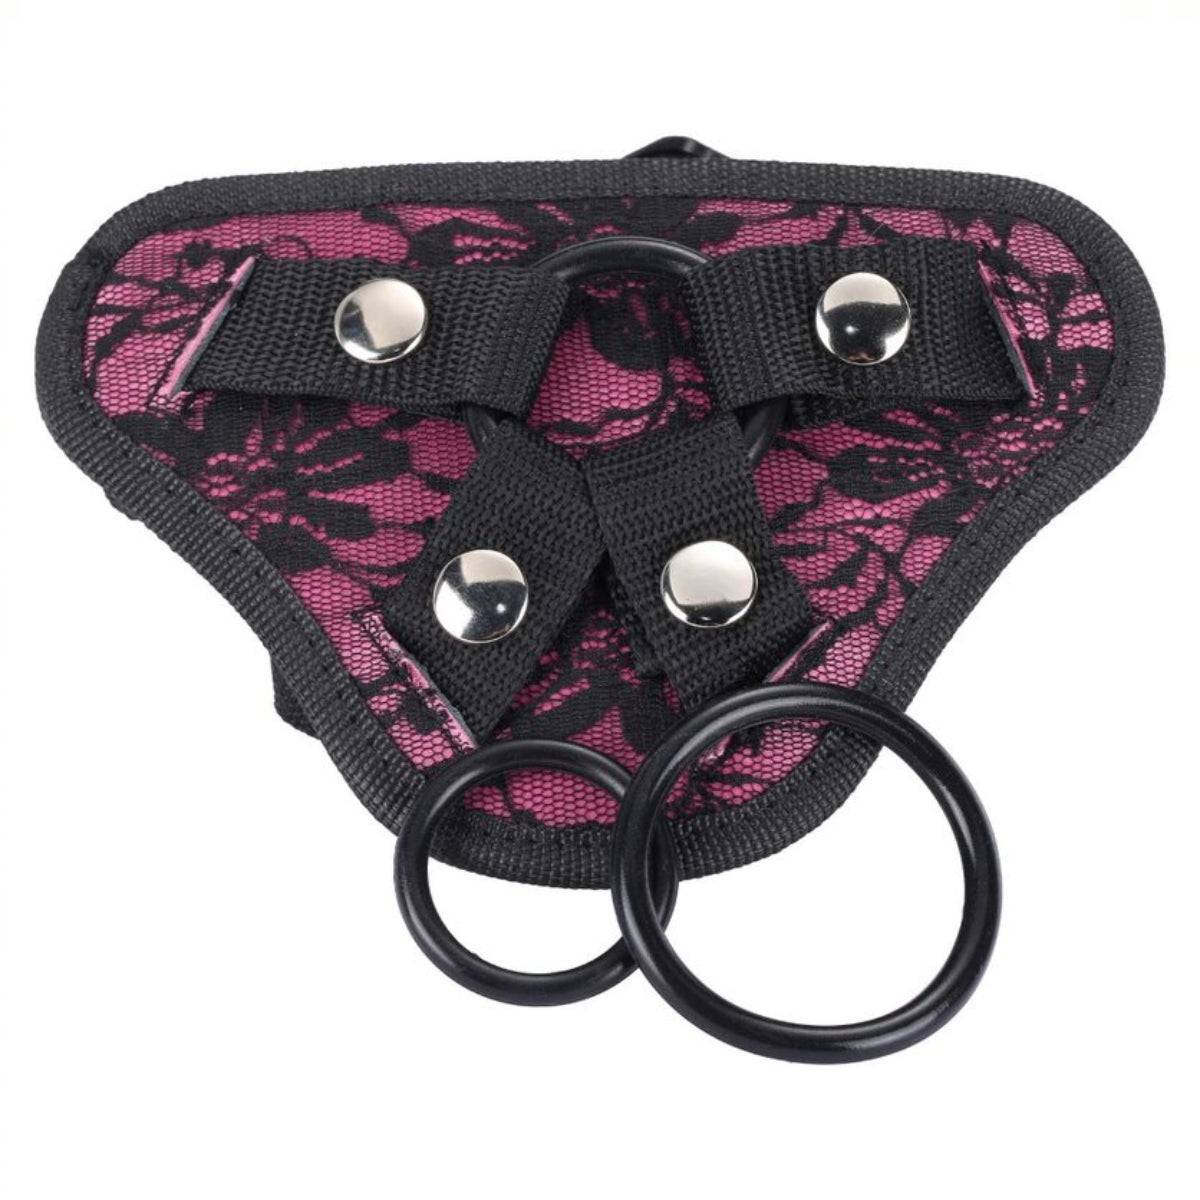 Me You Us Lace Adjustable Harness With Bullet Pocket Pink - Simply Pleasure